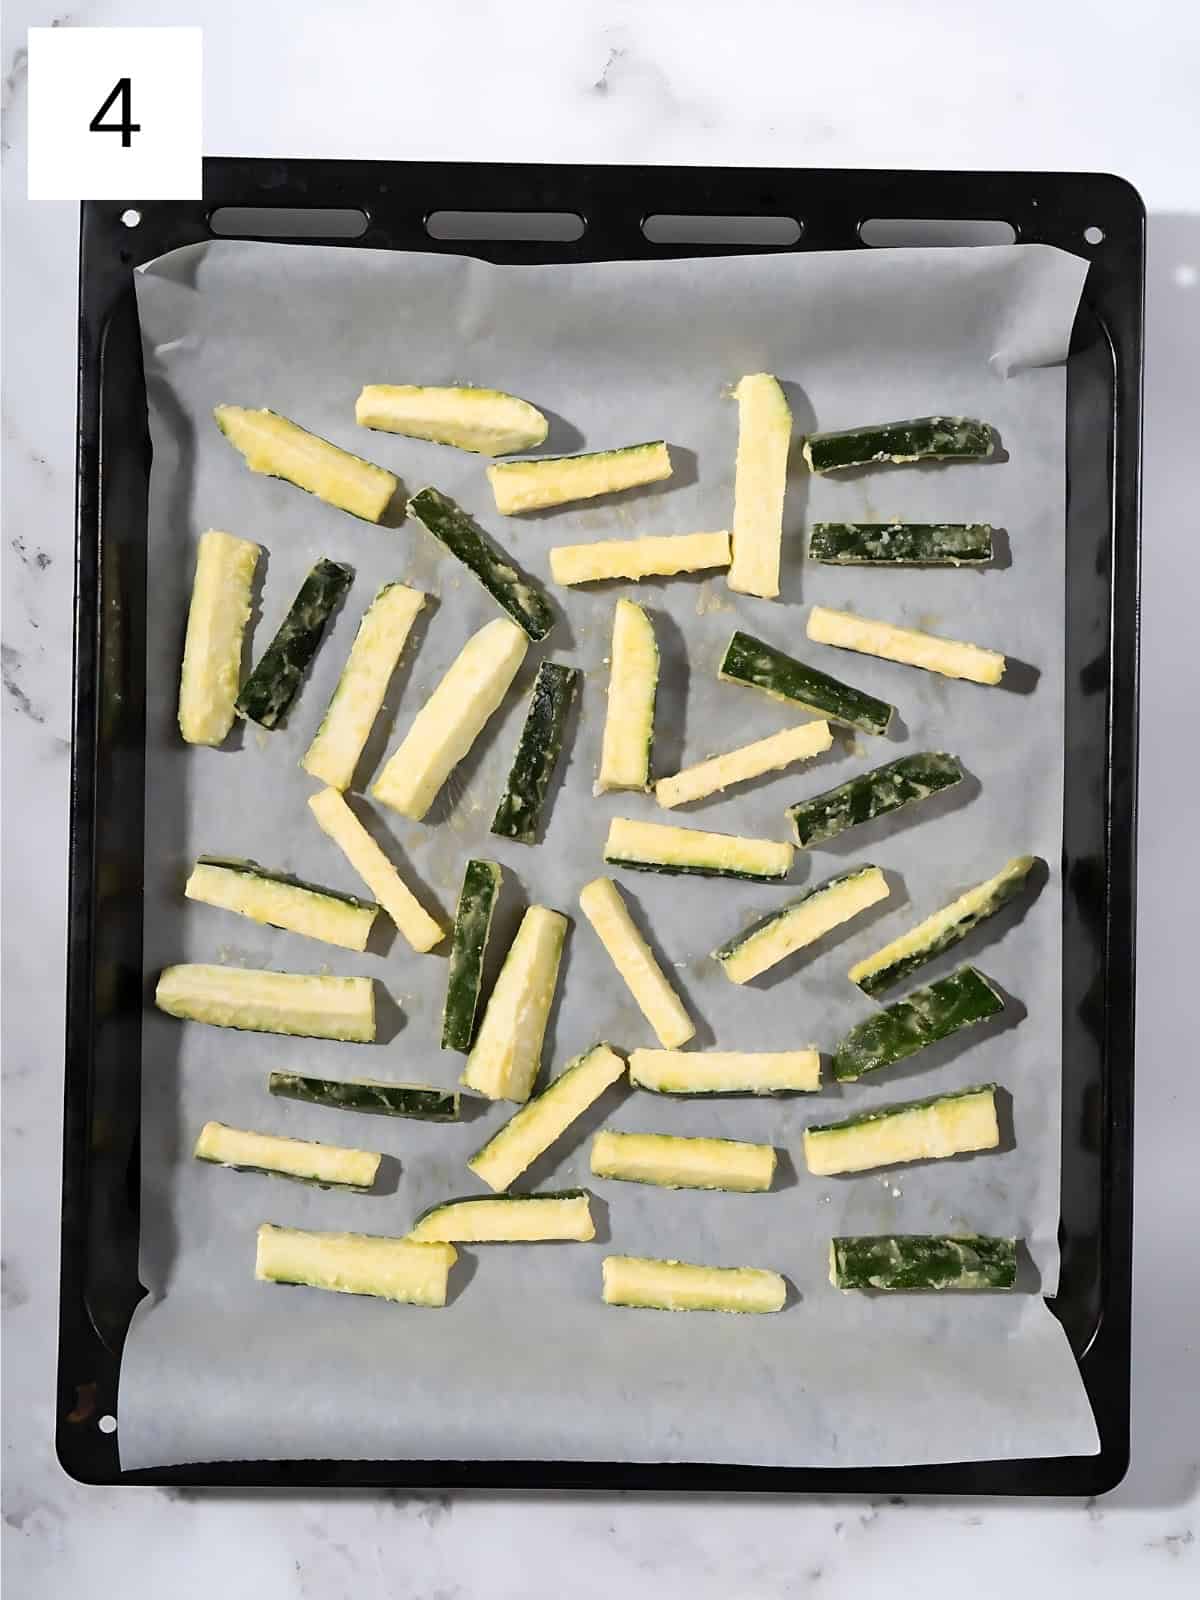 Zucchini fries covered with garlic powder on a baking tray.